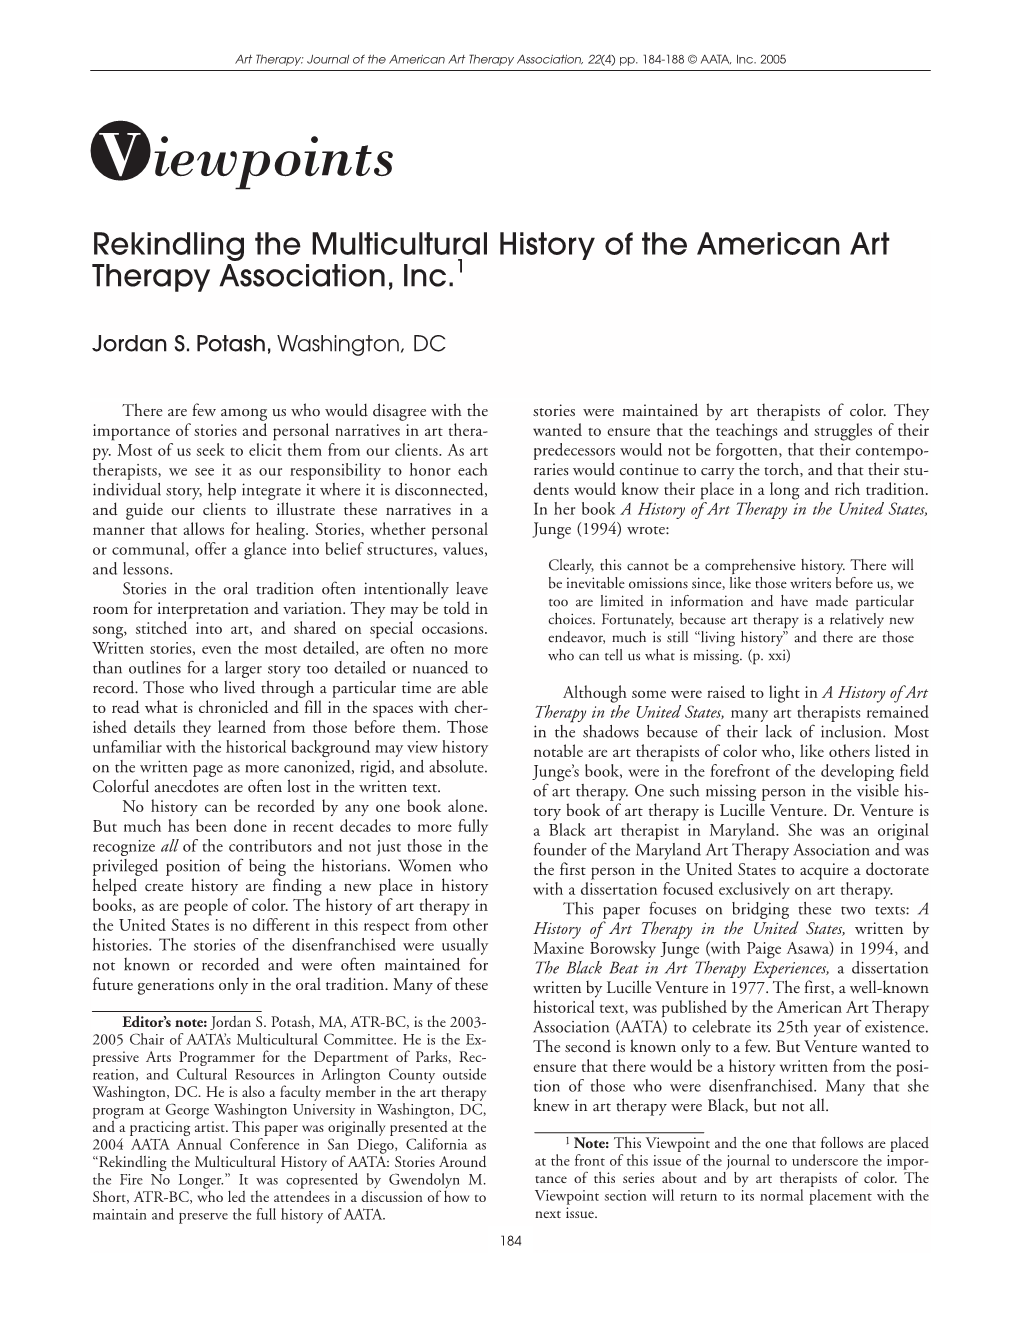 Rekindling the Multicultural History of the American Art Therapy Association, Inc.1